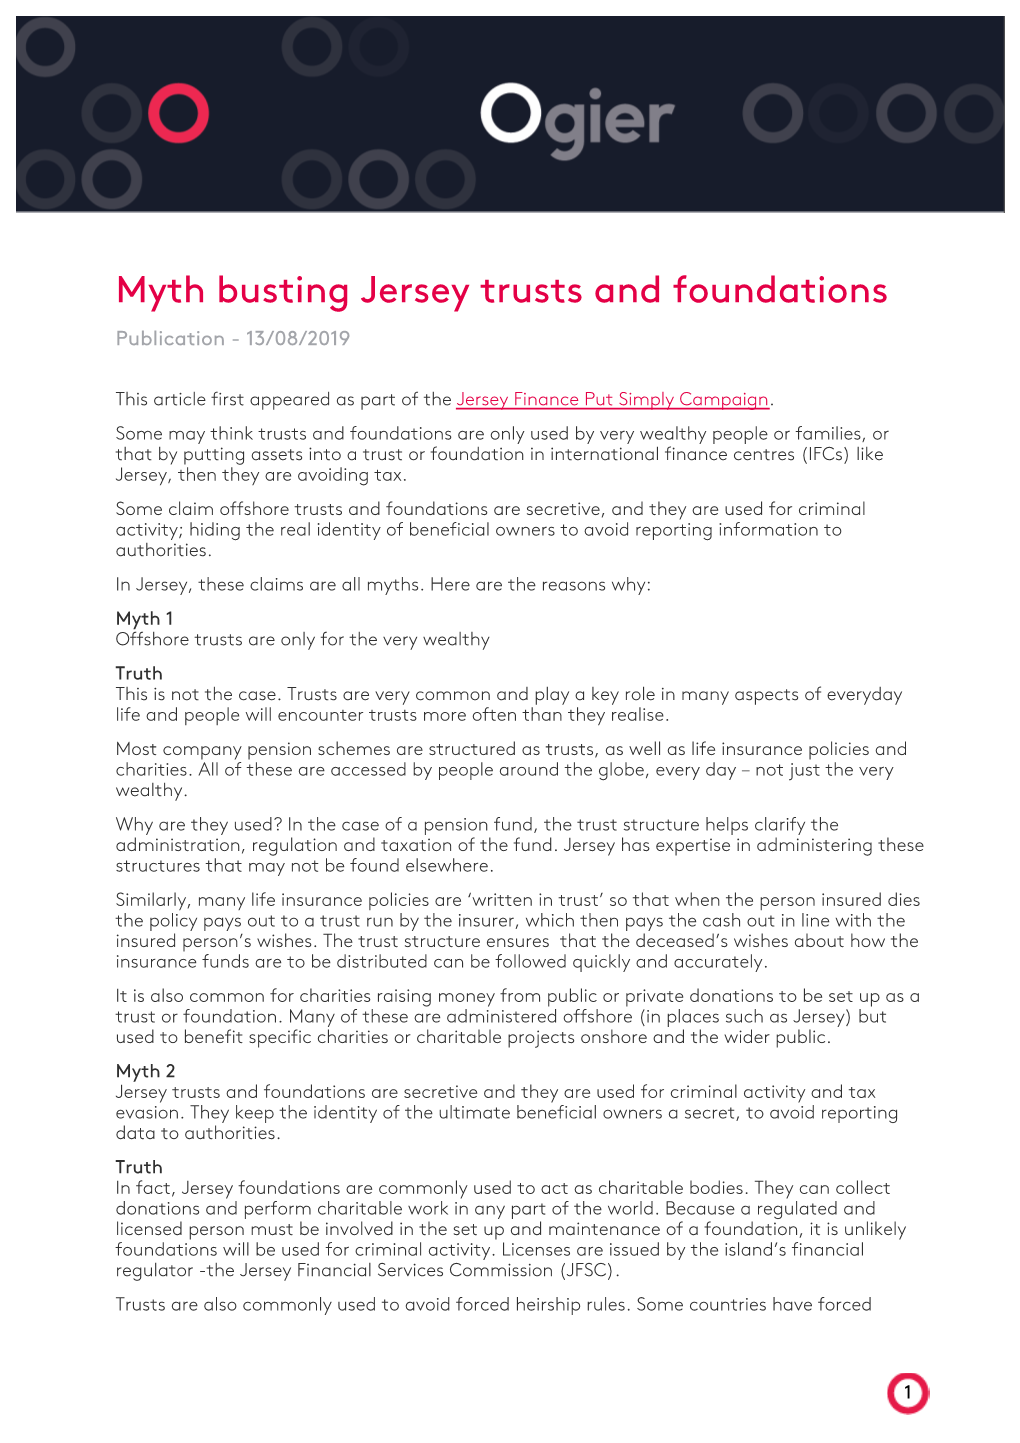 Myth Busting Jersey Trusts and Foundations Publication - 13/08/2019